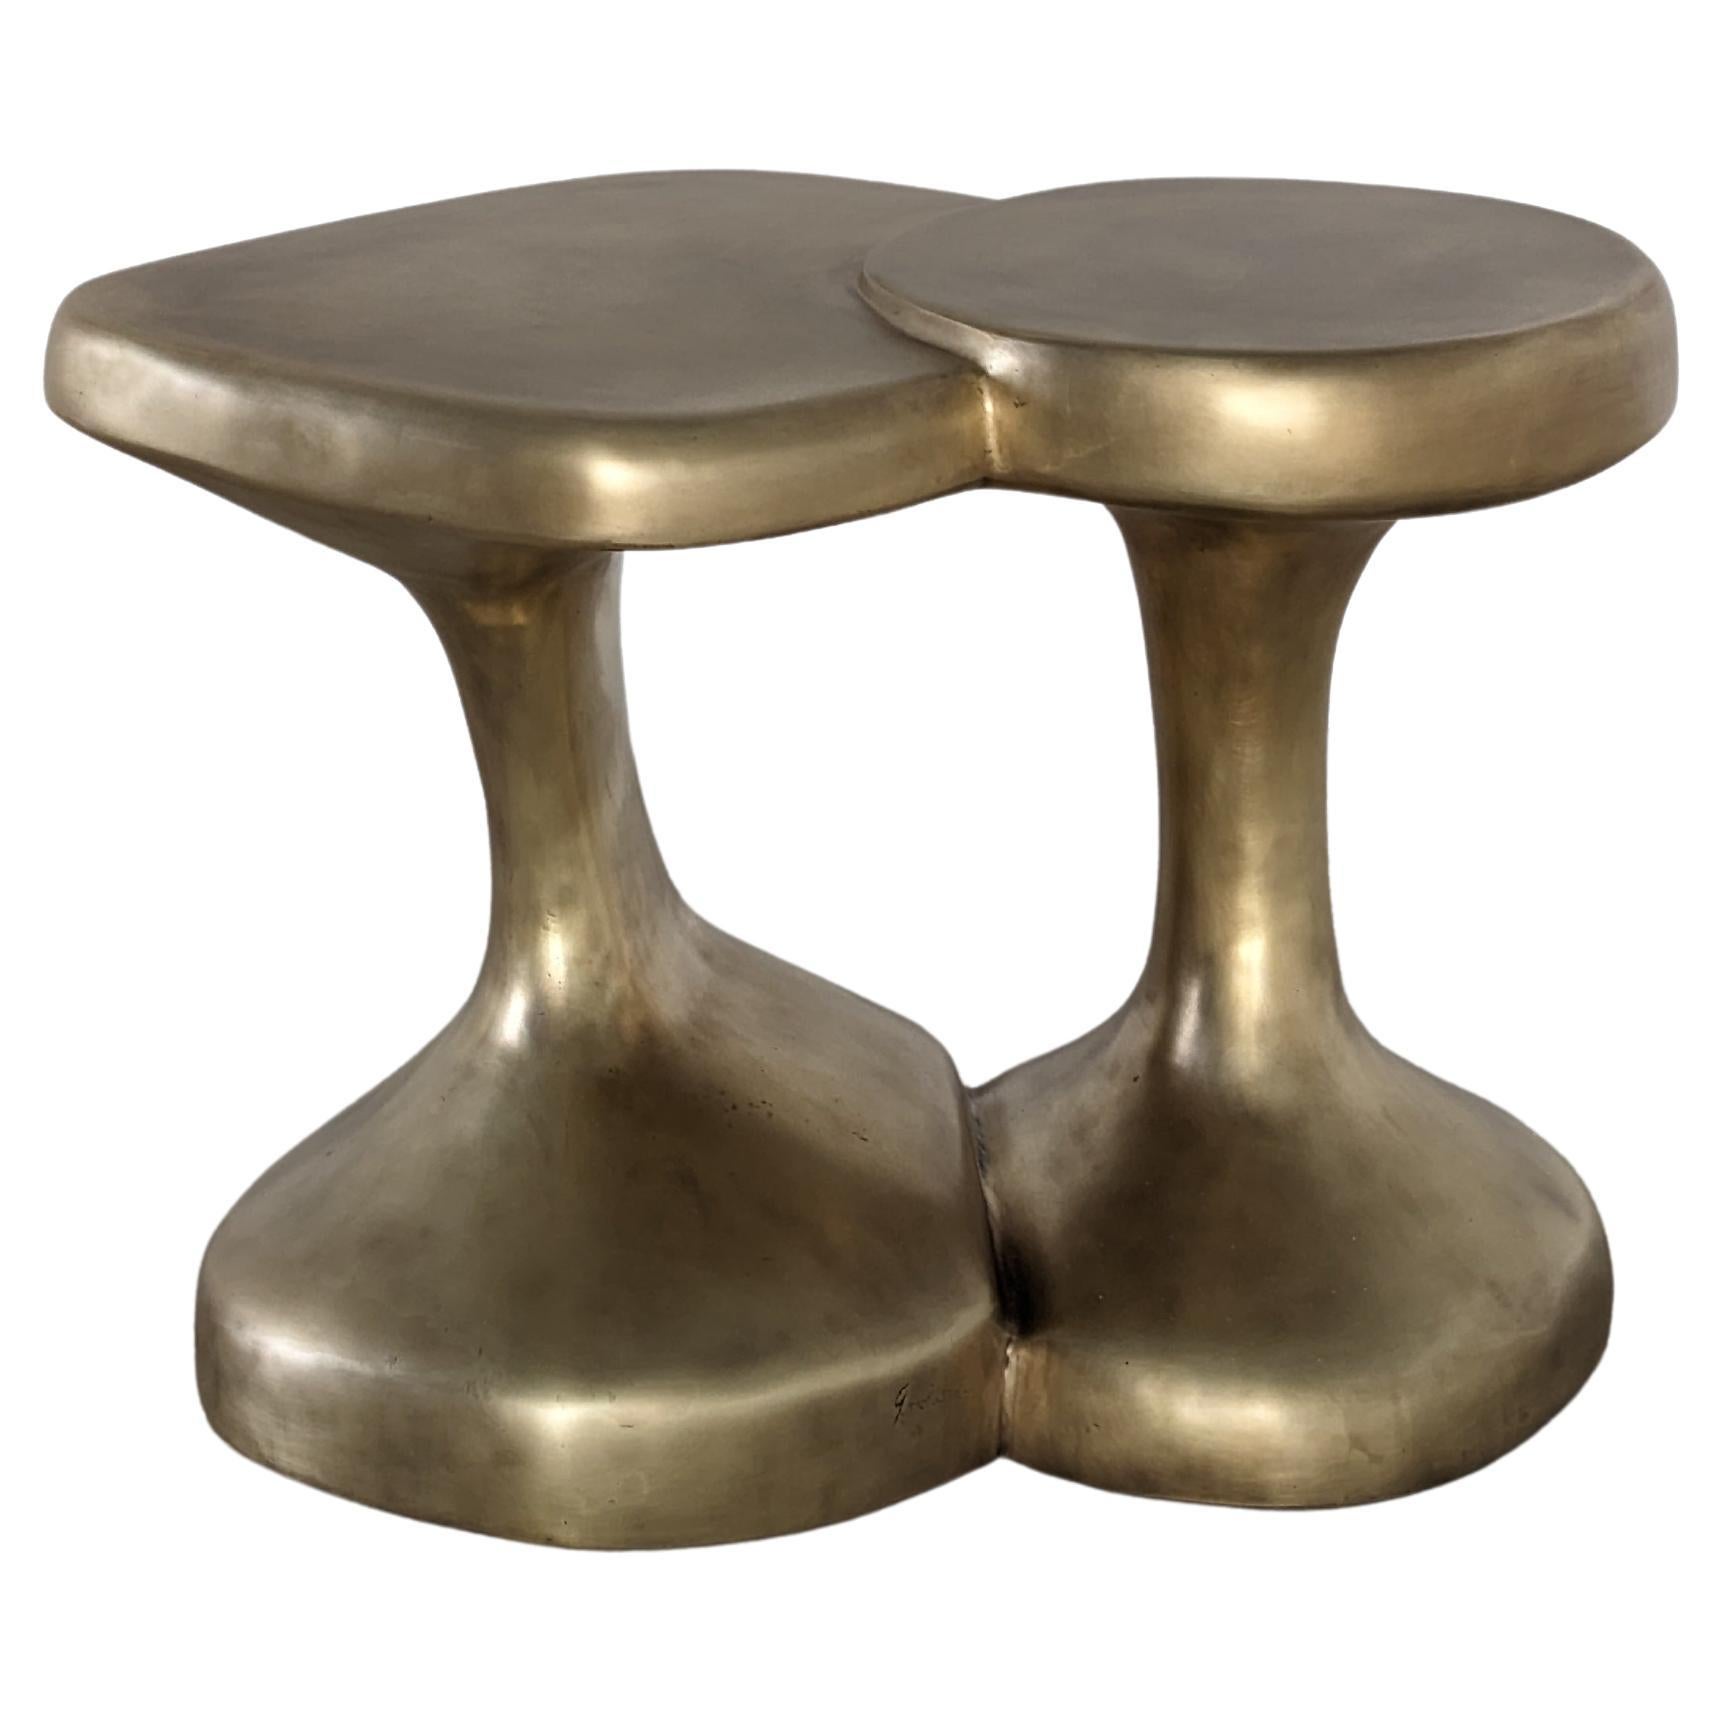 Georges Mohasseb Erosion Side table